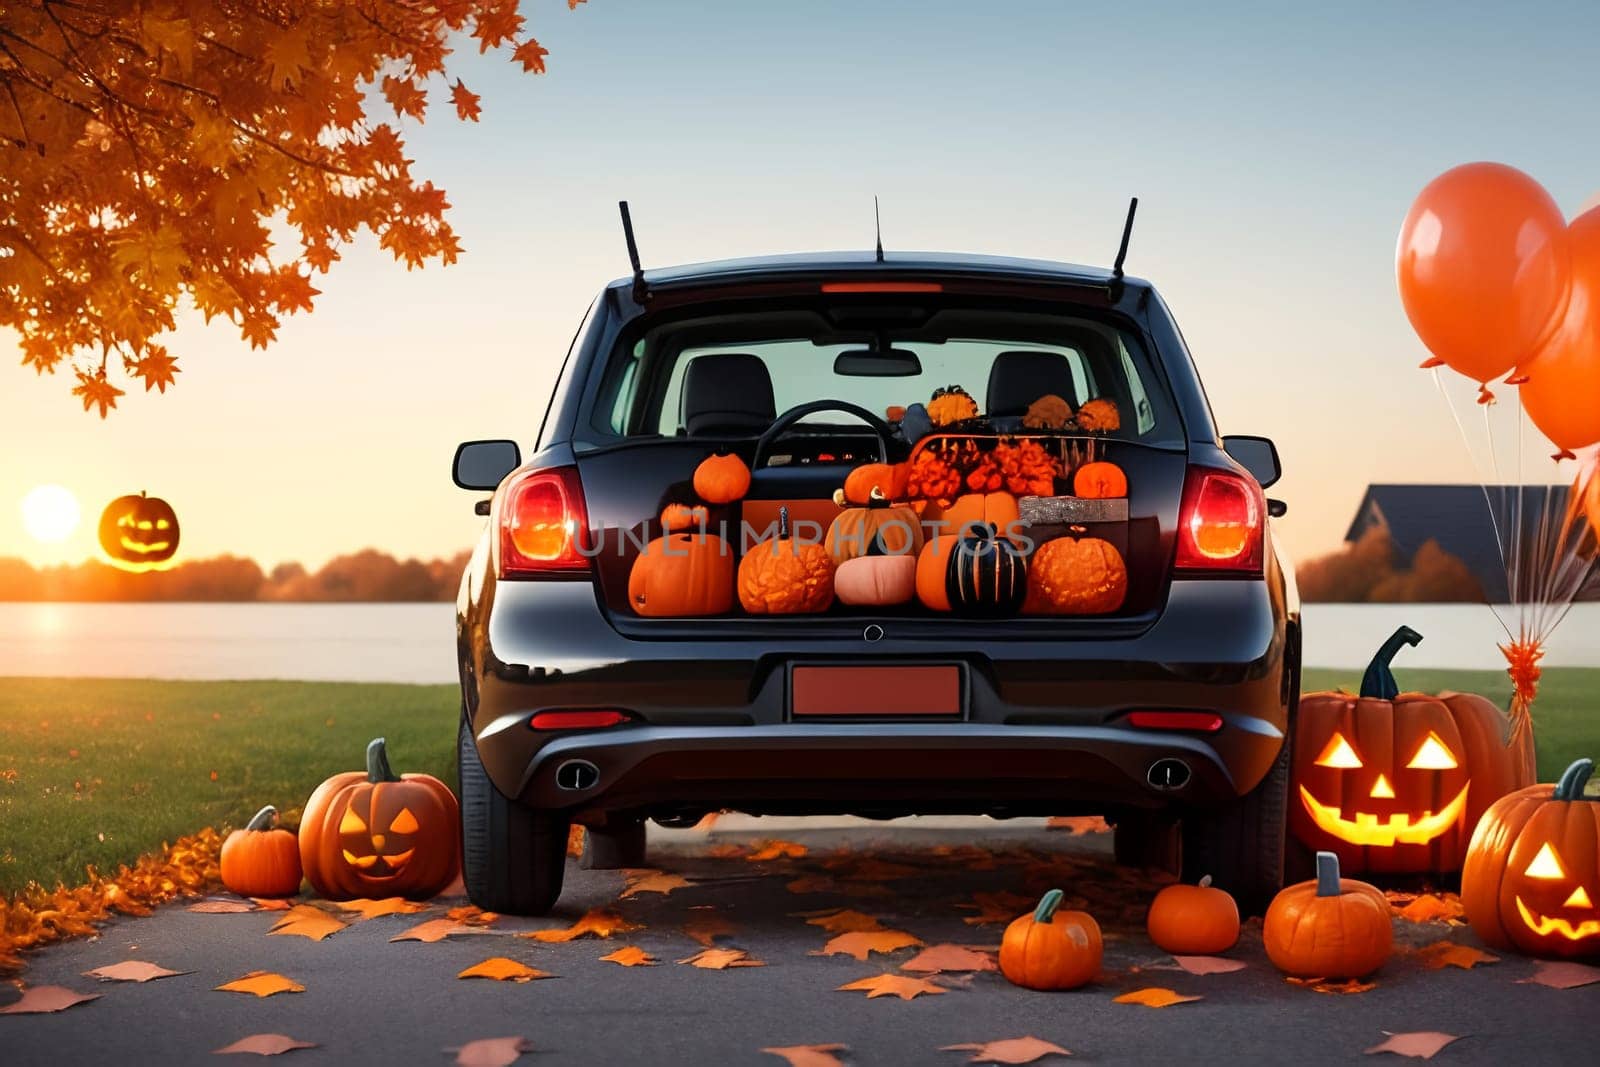 A large car decorated for Halloween with cobwebs, pumpkins, orange balloons and sweets. The concept of a creative outdoor event in autumn.